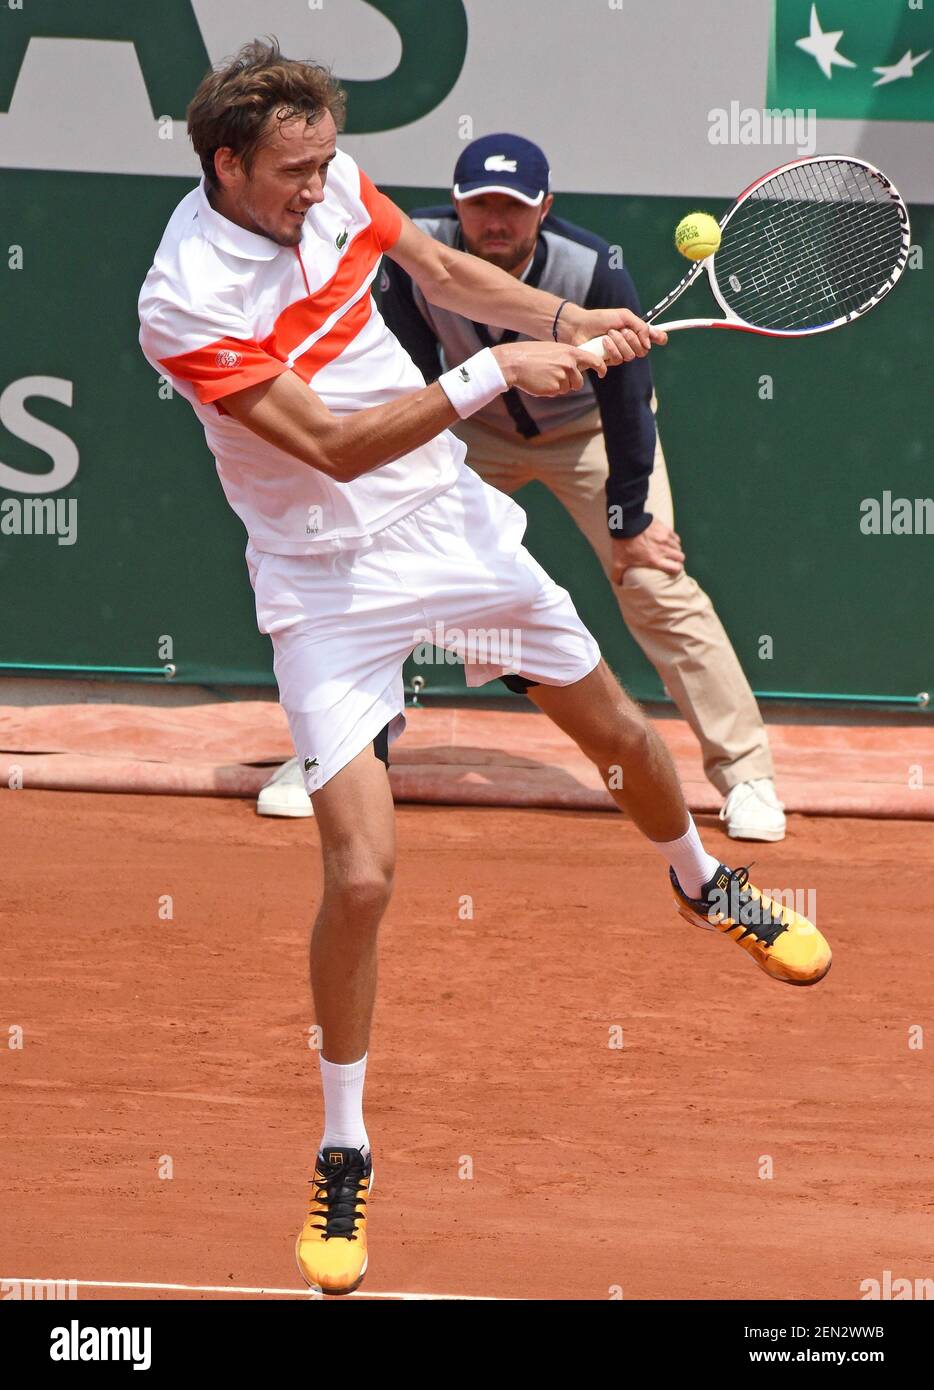 Roland-Garros - The 2019 Roland-Garros Tournament. Men's singles. 1st  round. Russian tennis player Daniil Medvedev during the match with French  tennis player Pierre-Hugues Herbert. May 27, 2019. France, Paris. Photo  credit: Sergei'